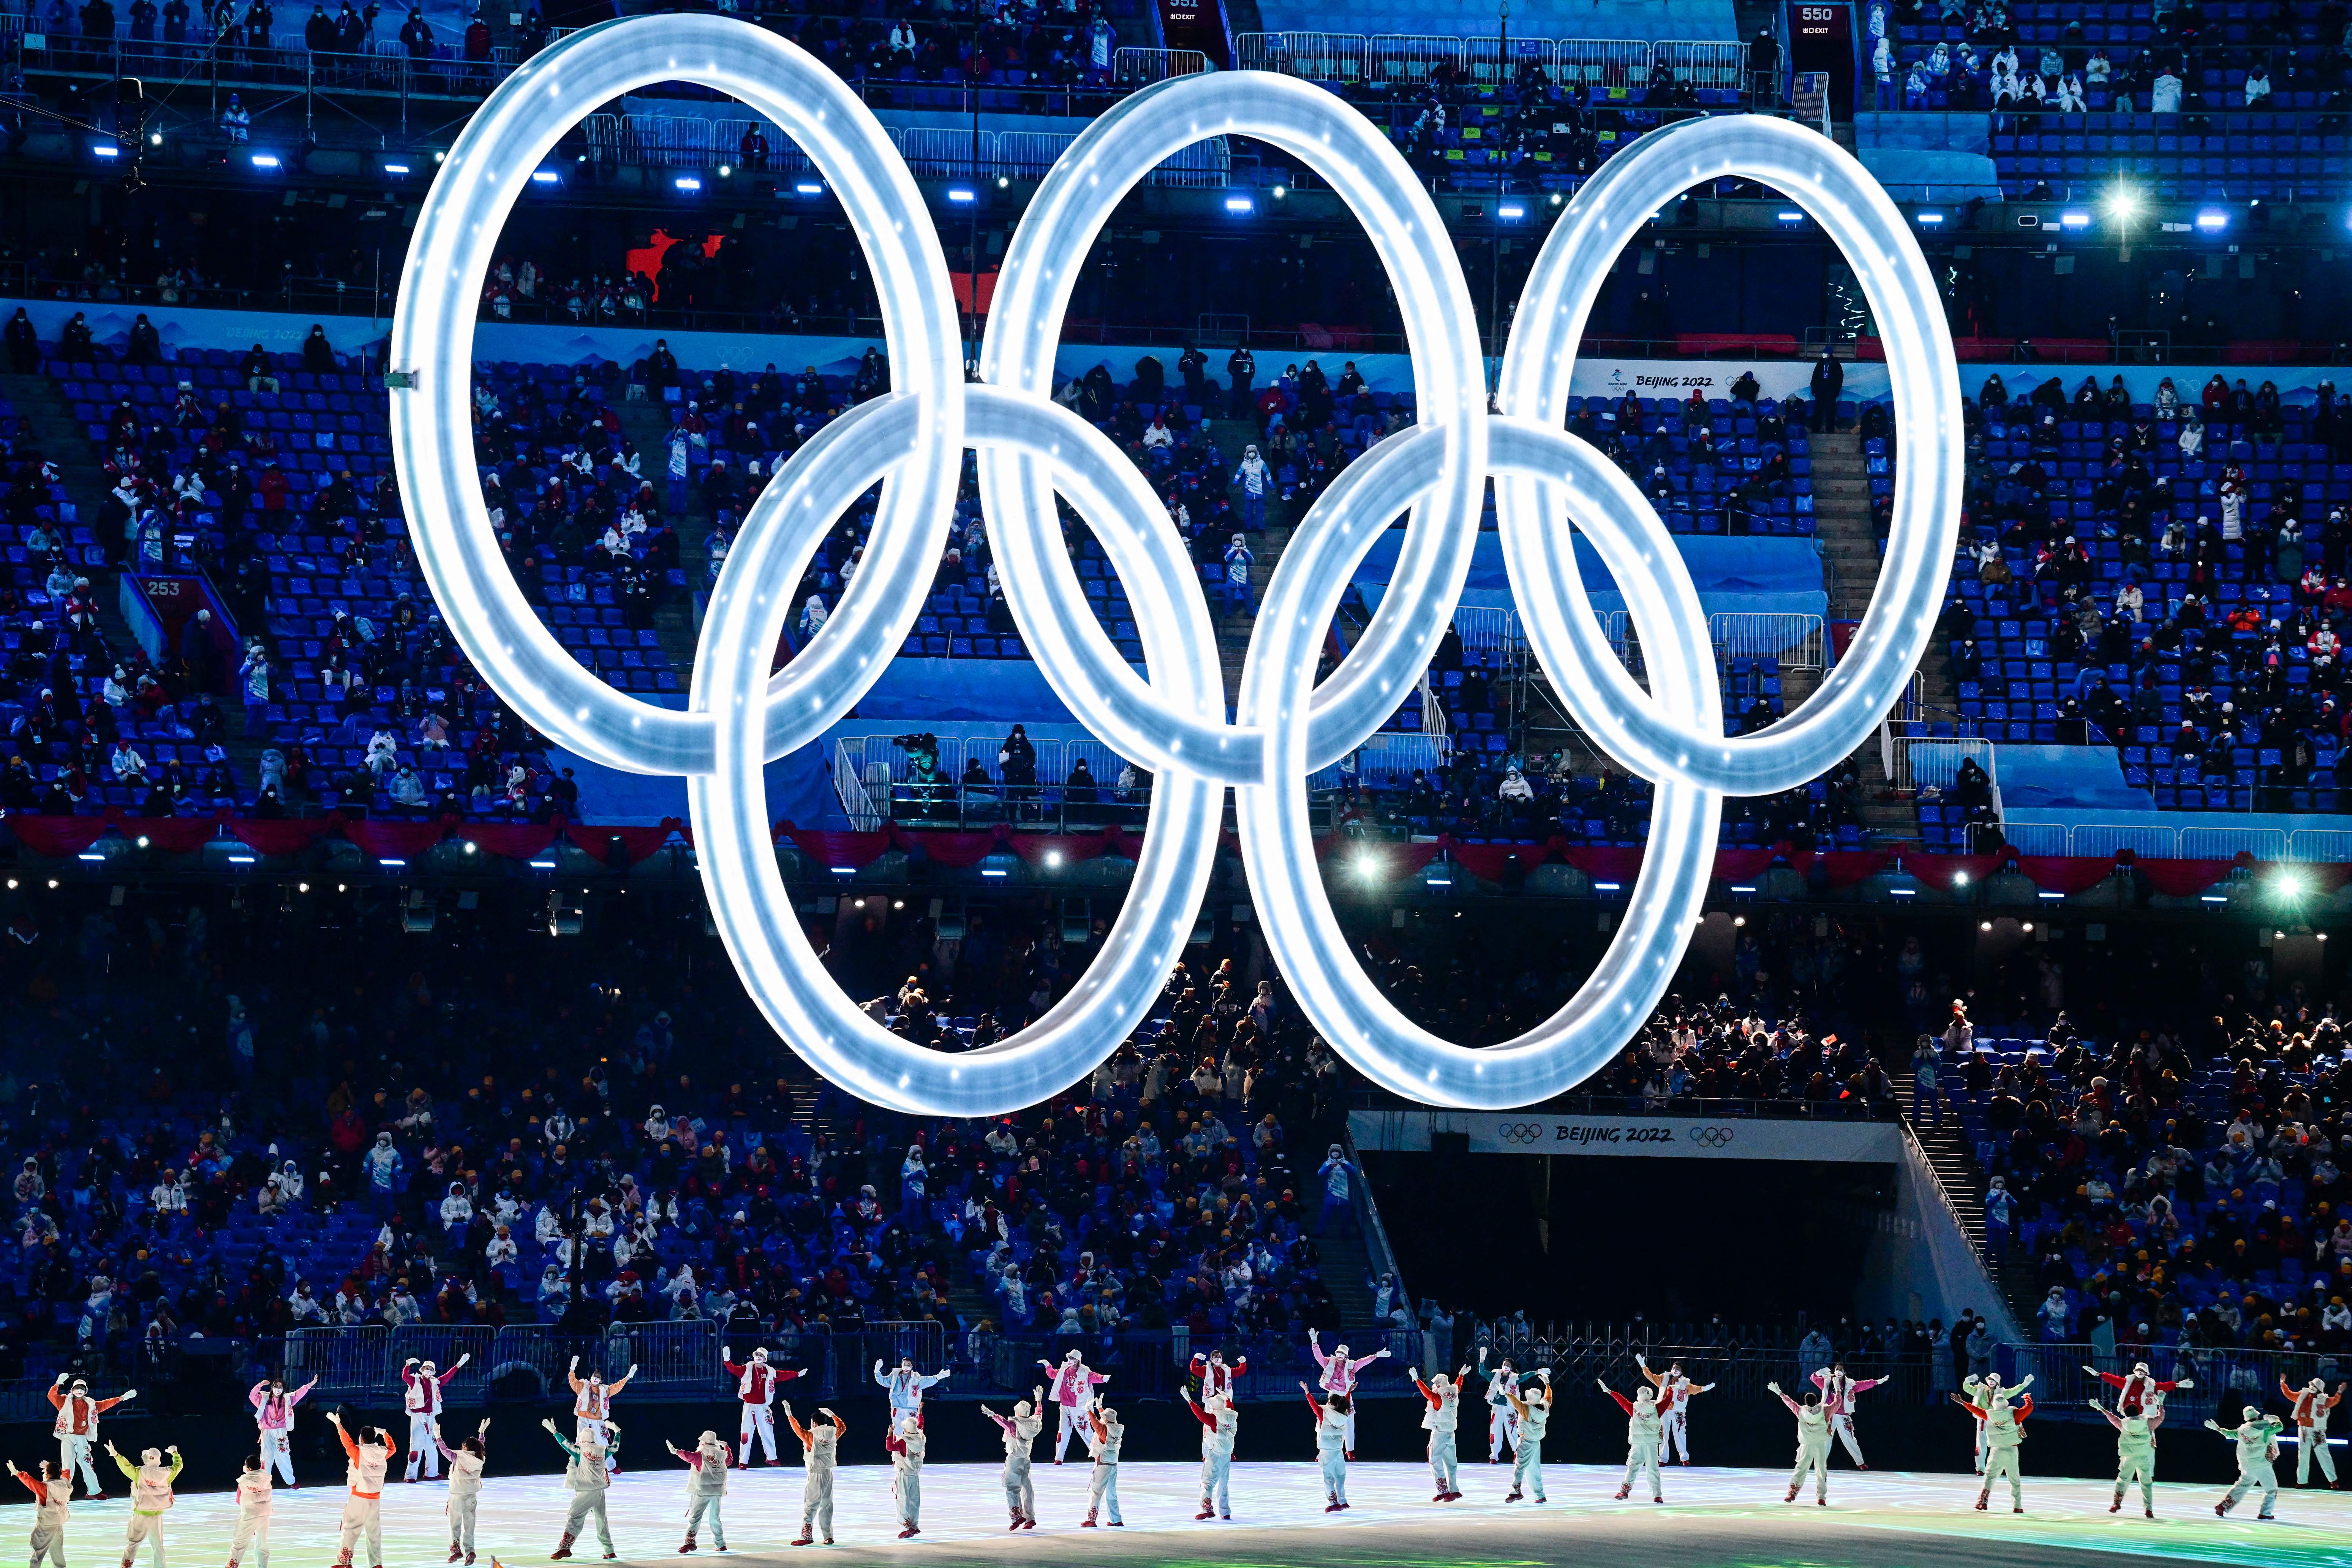 Performers dance under the Olympic Rings during the opening ceremony of the Beijing 2022 Winter Olympic Games, at the National Stadium in Beijing, on February 4.